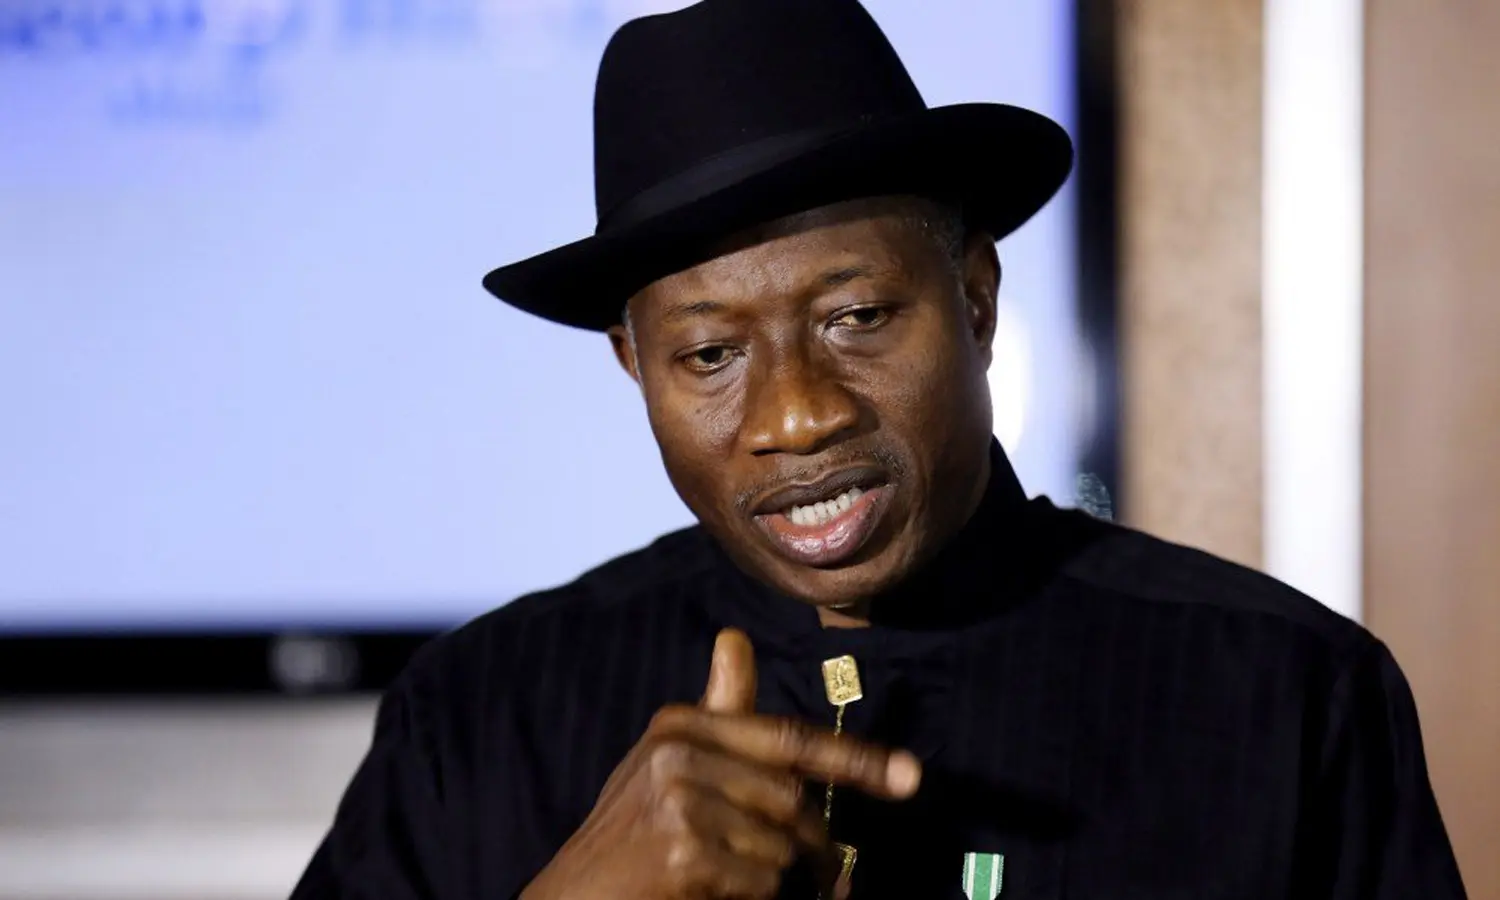 You are currently viewing Goodluck Jonathan Rejects APC Form, Says He is Not Interested in 2023 Presidency